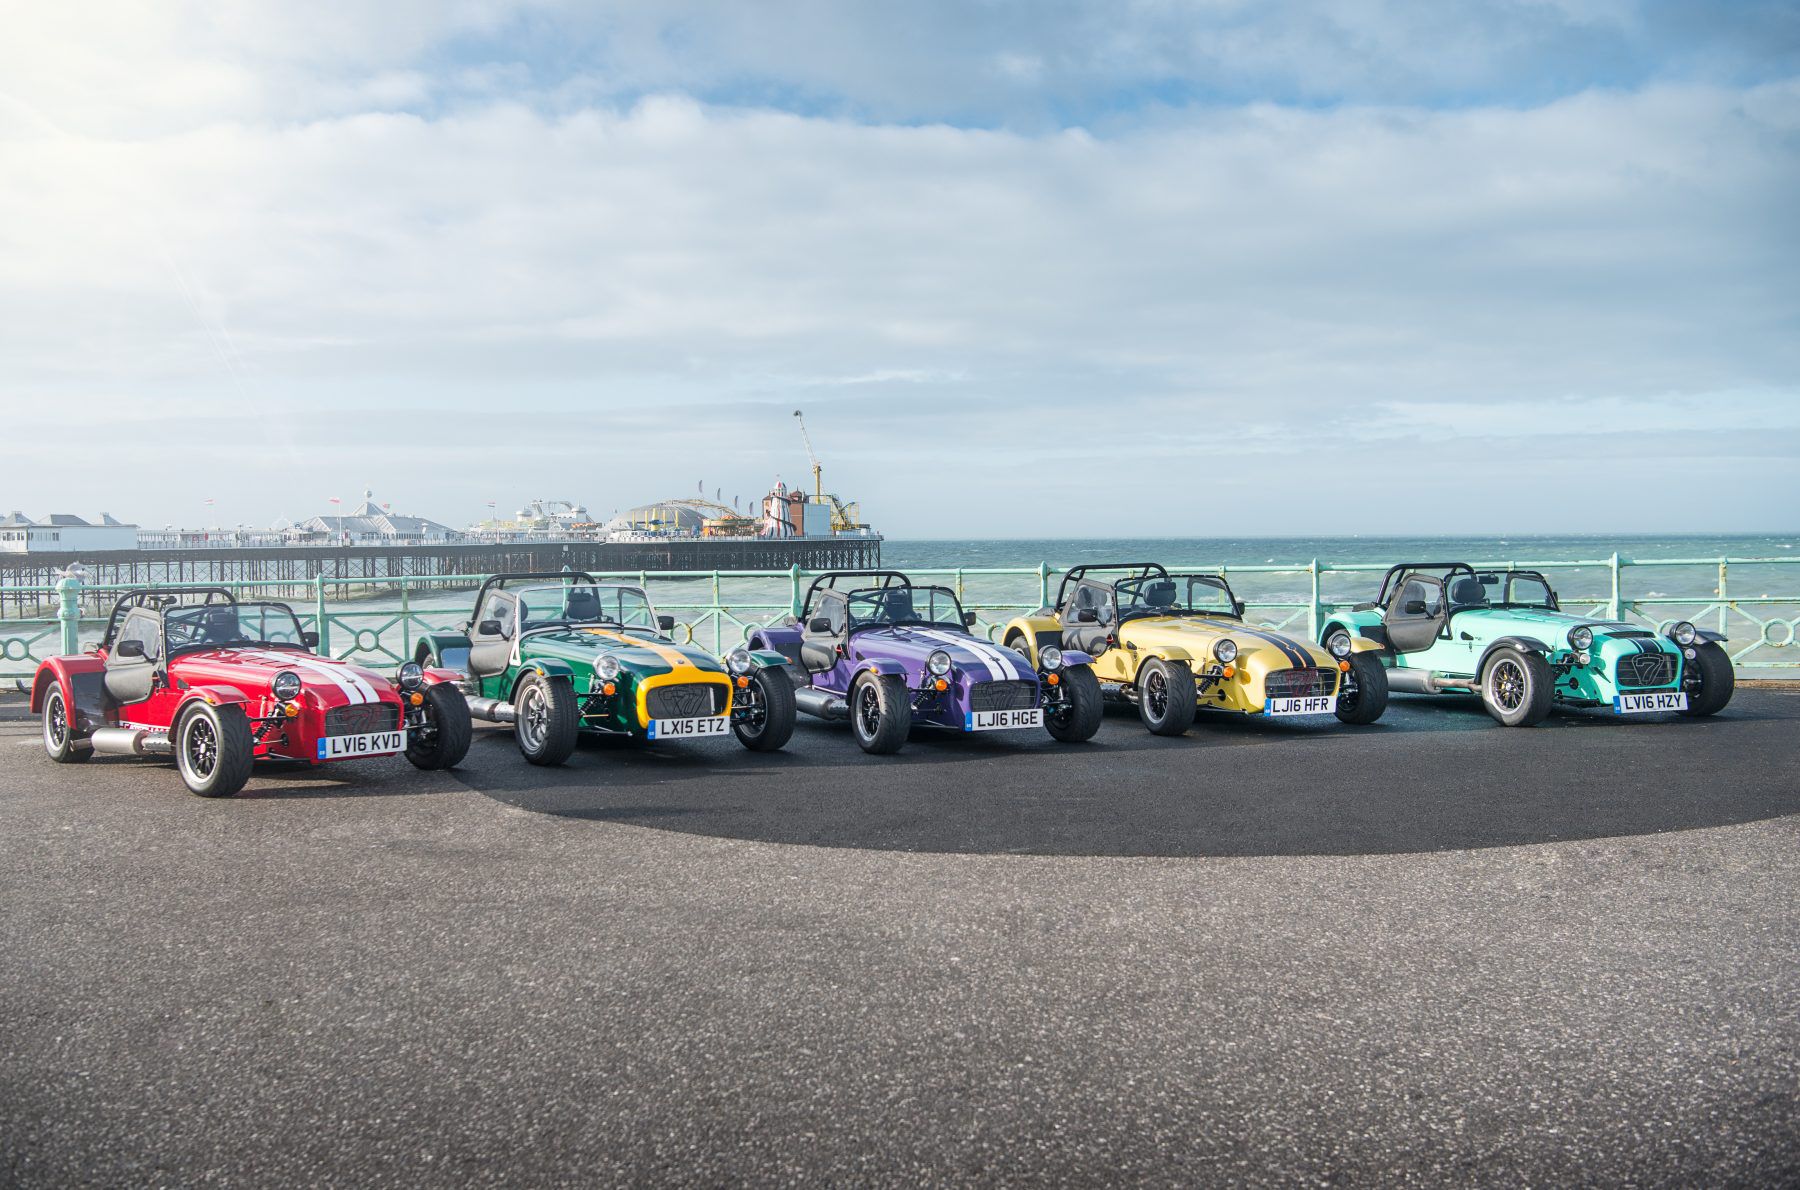 Caterham-Seven parked by the sea